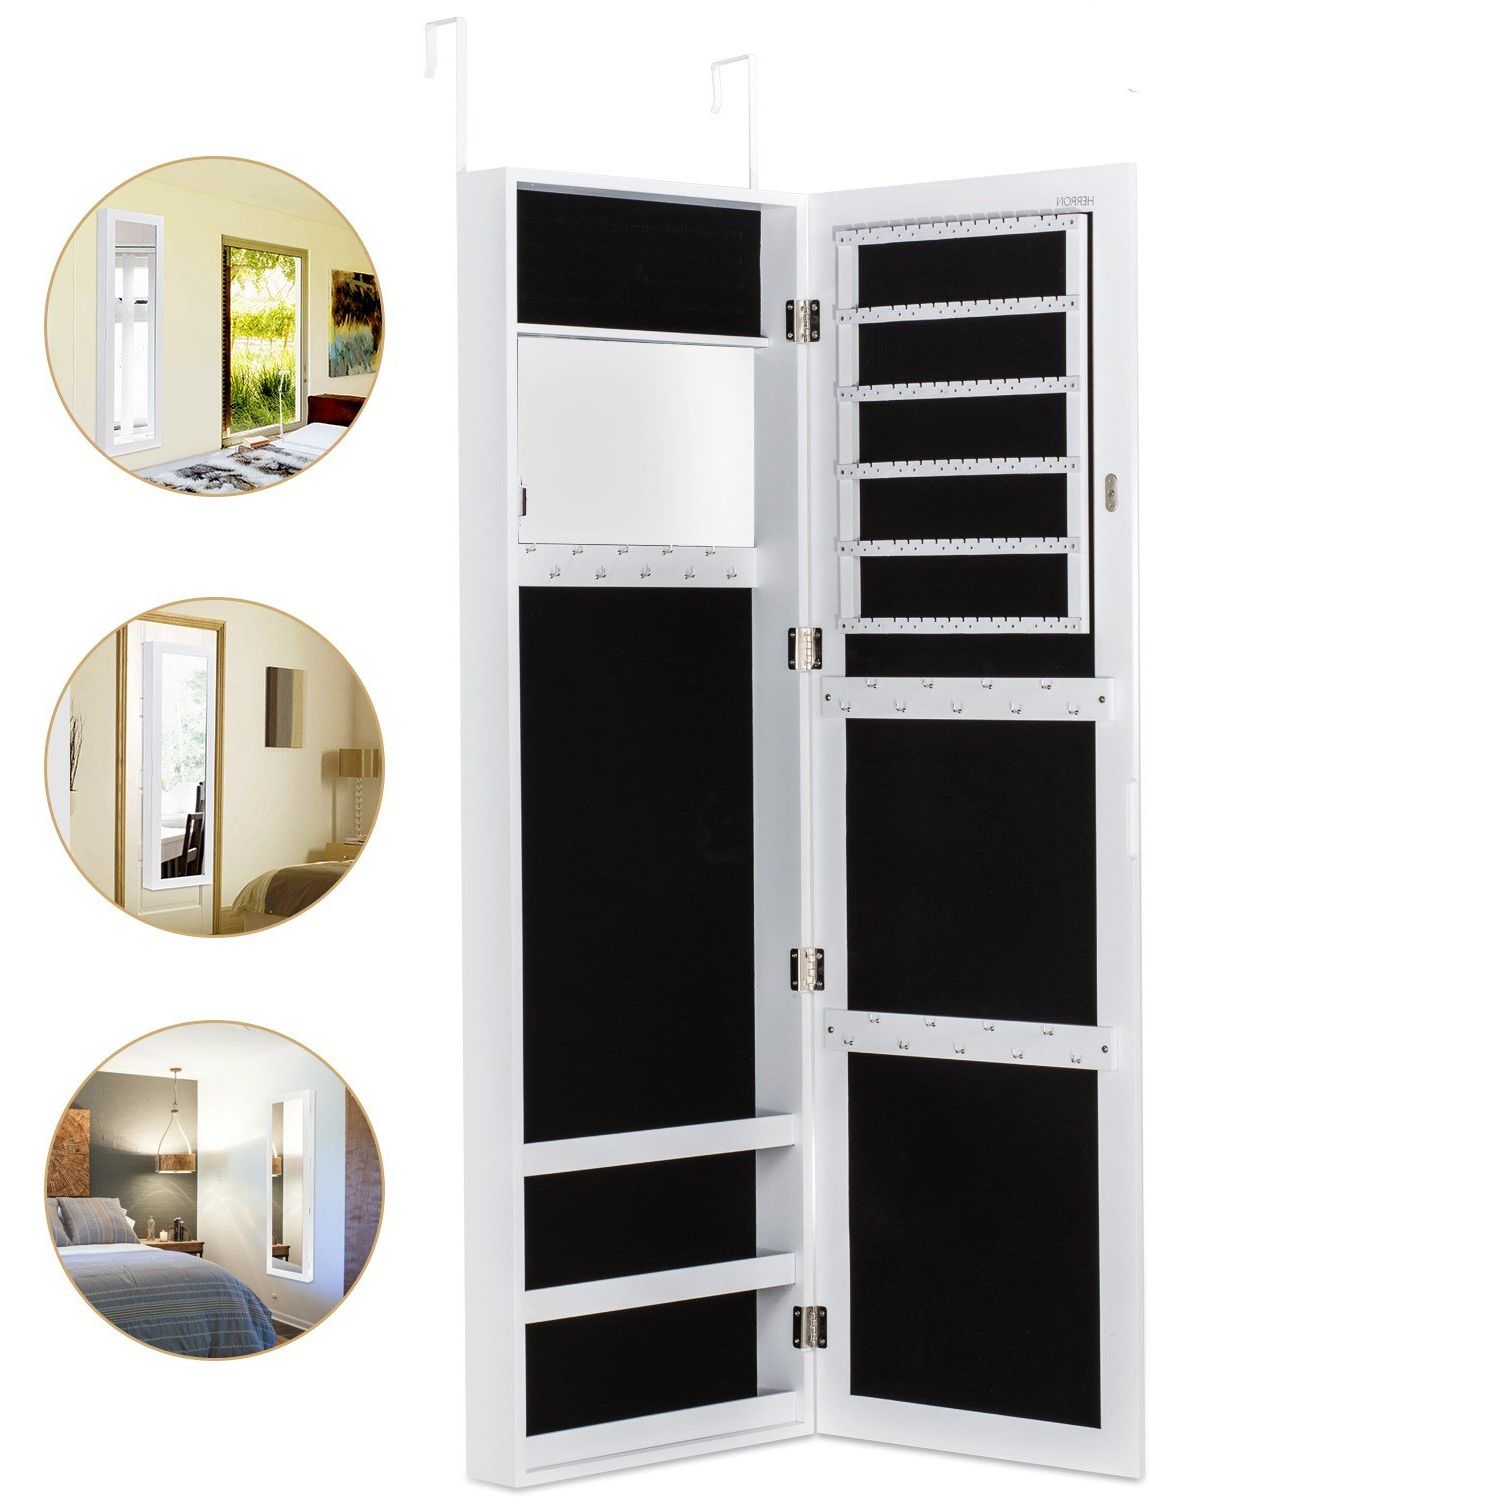 2019 Amazon: Herron Wall Jewelry Cabinet Armoire With Mirror Pertaining To Jewelry Box Wall Mirrors (View 15 of 20)